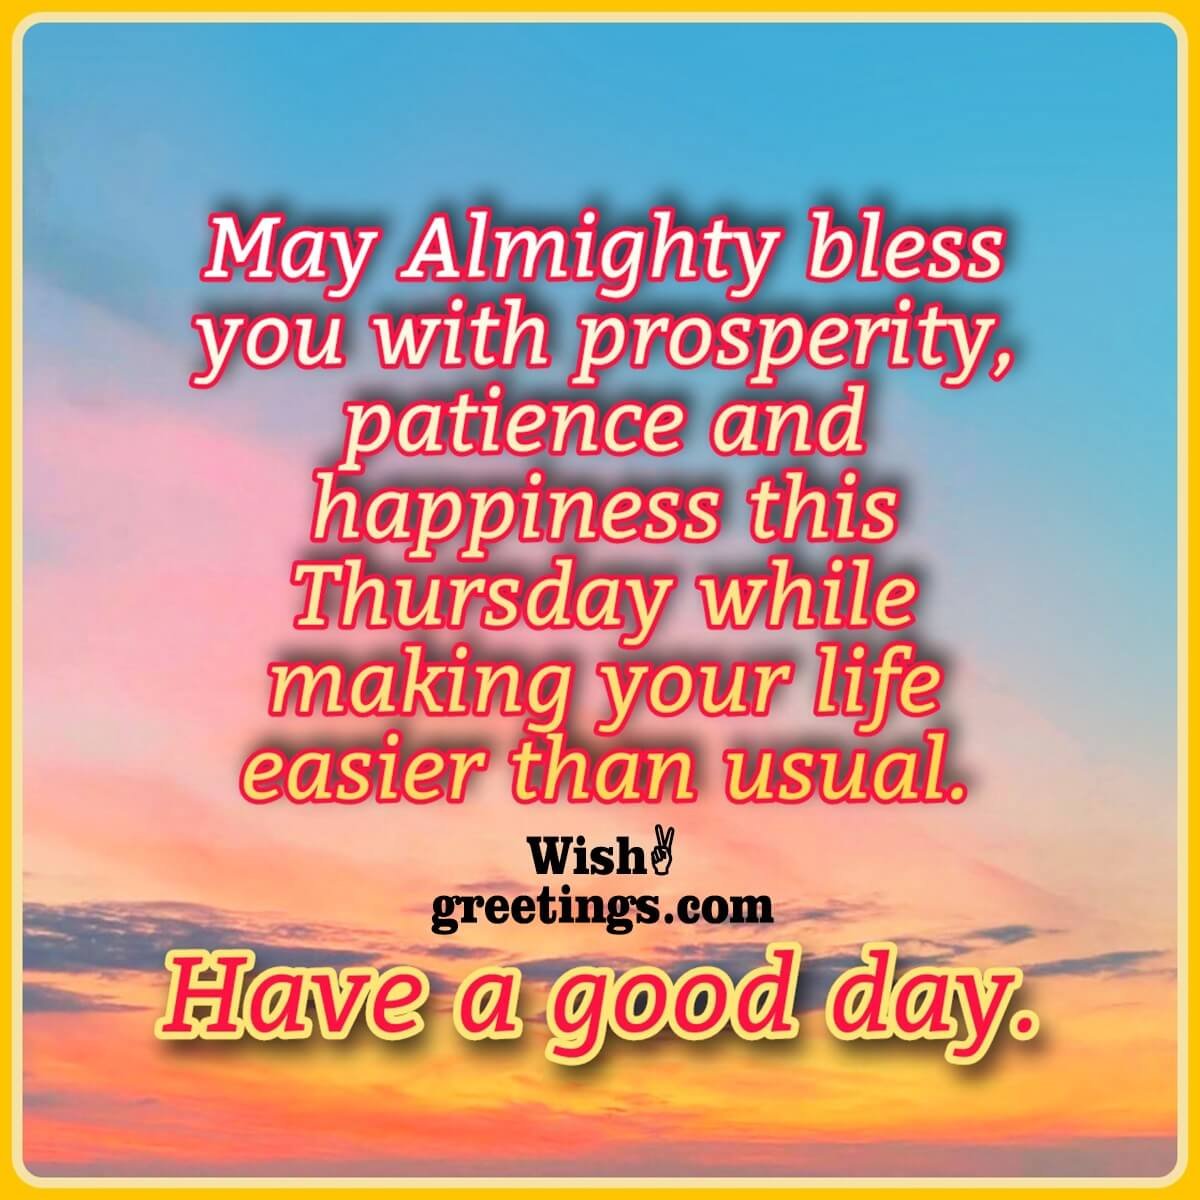 Good Day Wish Message For Thursday